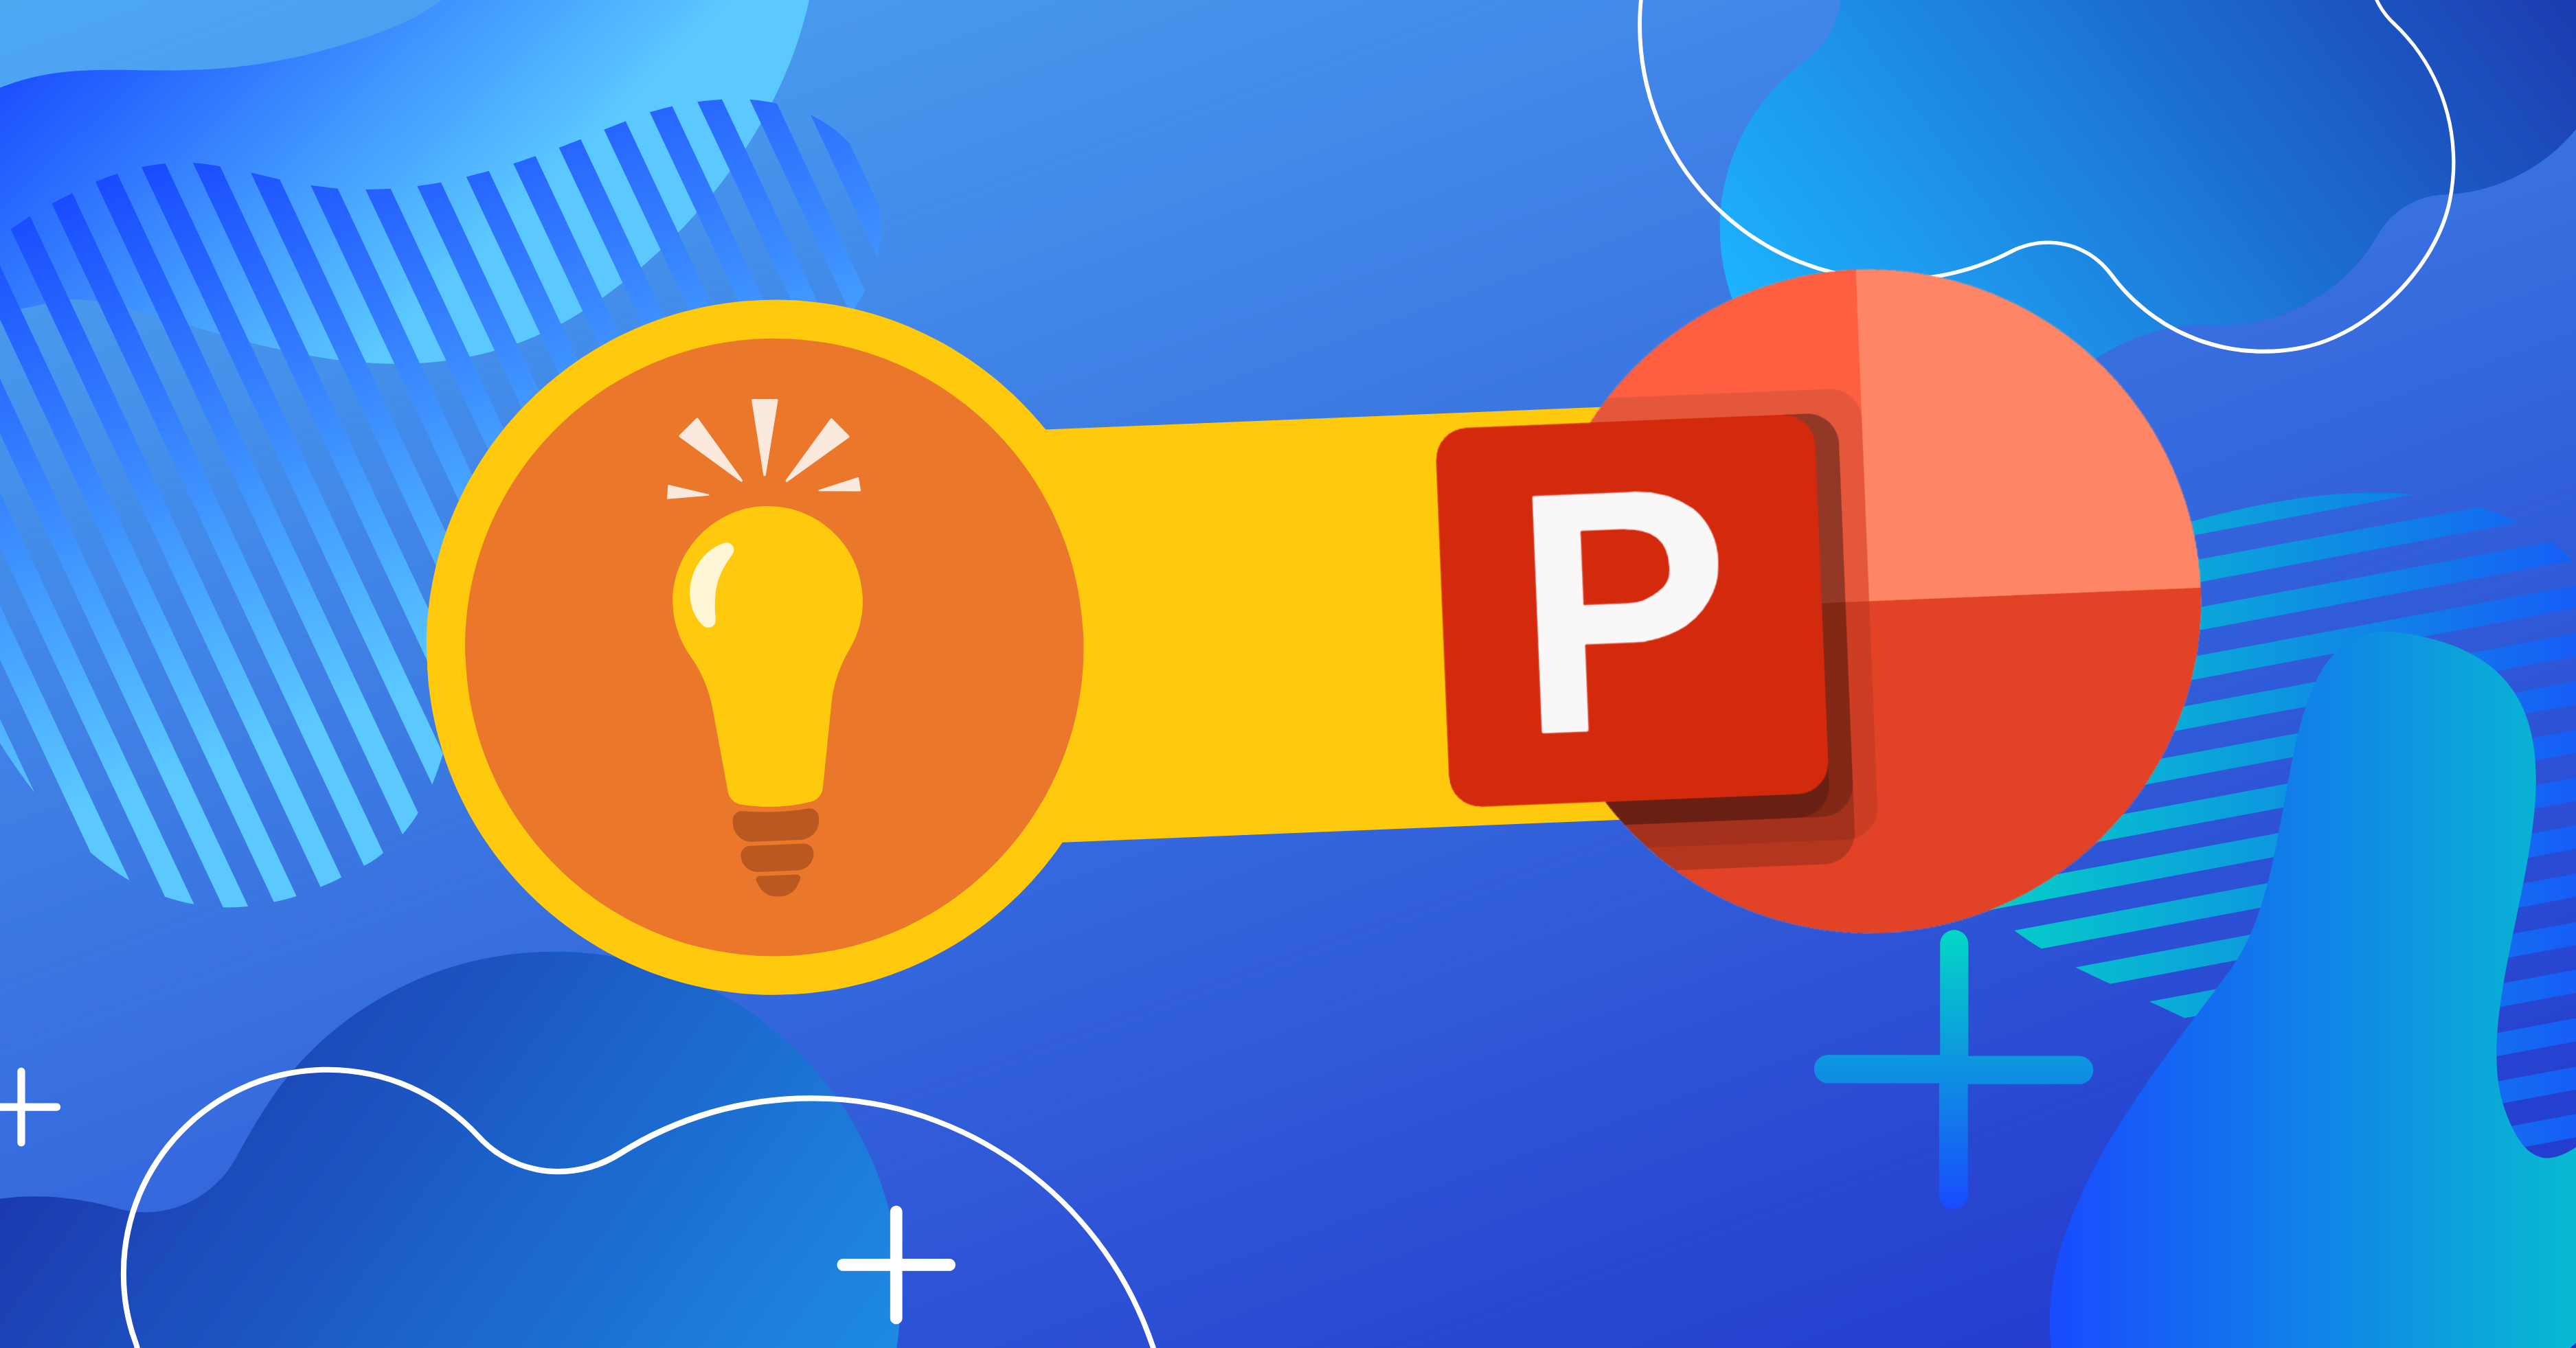 27 Super Hidden PowerPoint Tips and Tricks Only The Pros Know!